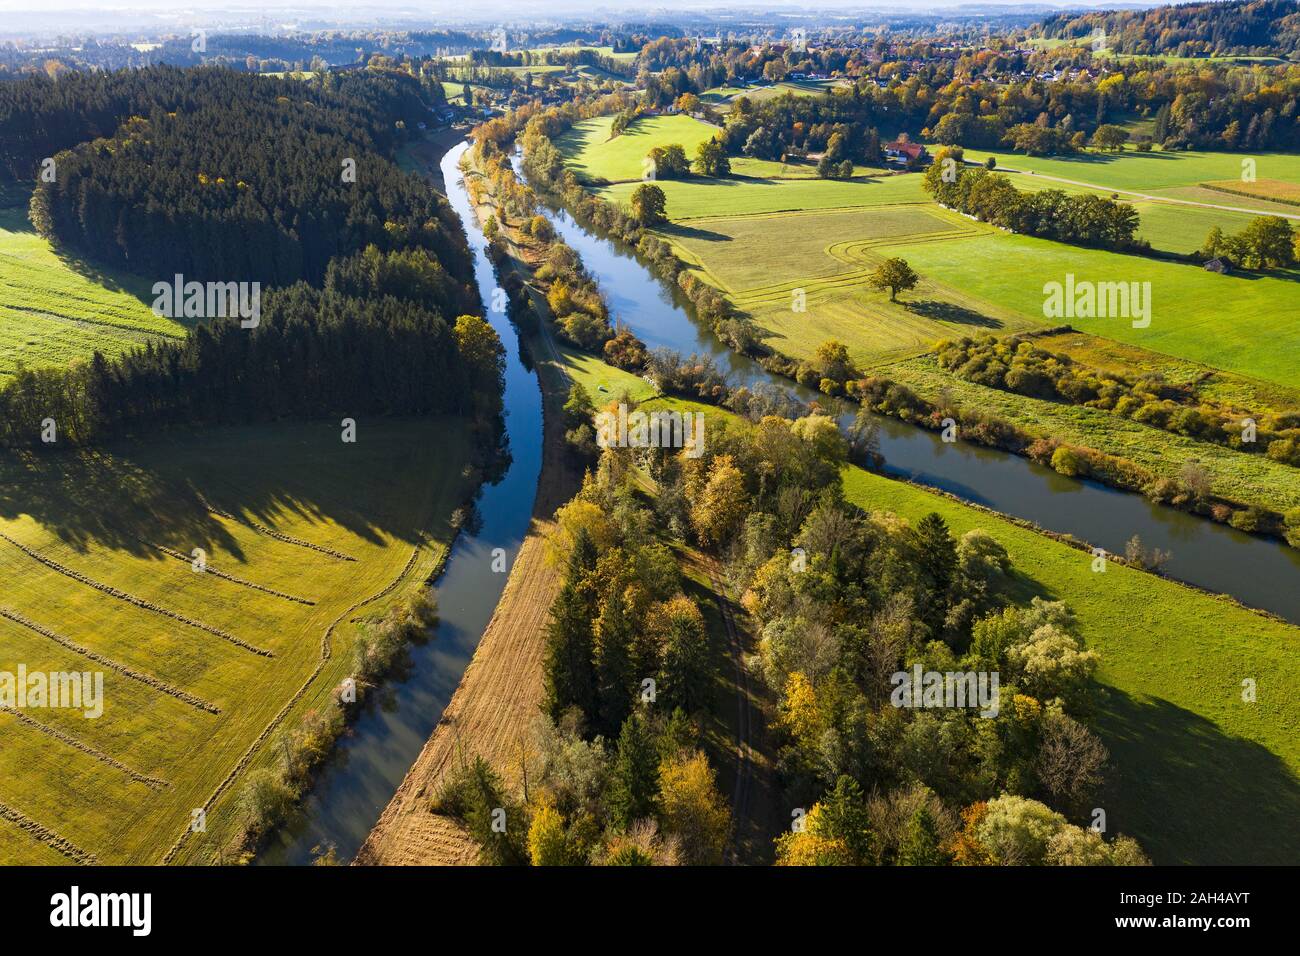 Germany, Bavaria, Eurasburg, Aerial view of Loisach and Isar canals Stock Photo